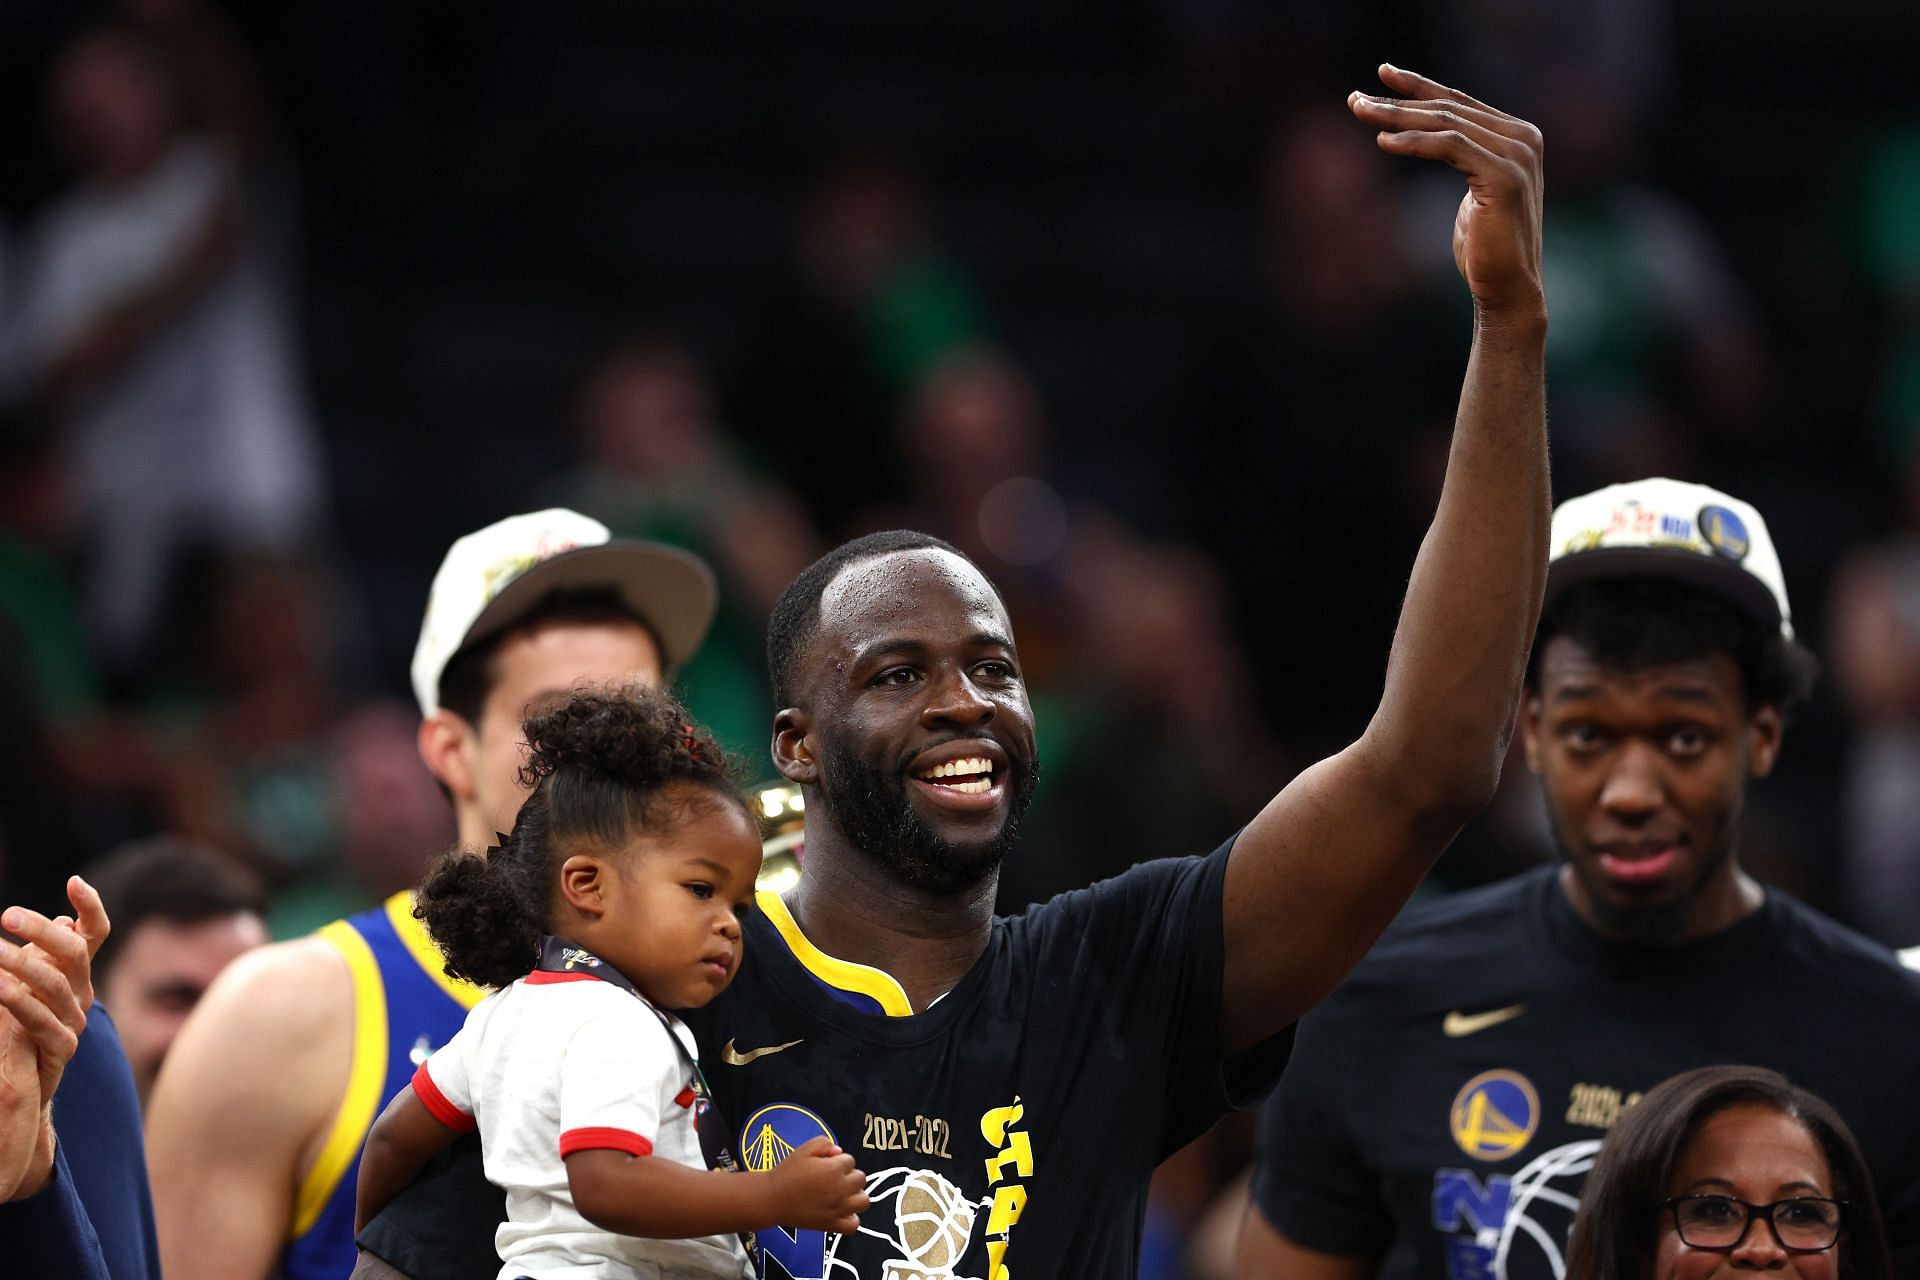 2022 &lt;a href=&#039;https://www.sportskeeda.com/basketball/nba-finals&#039; target=&#039;_blank&#039; rel=&#039;noopener noreferrer&#039;&gt;NBA Finals&lt;/a&gt;, Game Six; Draymond Green with his daughter celebrating the championship.